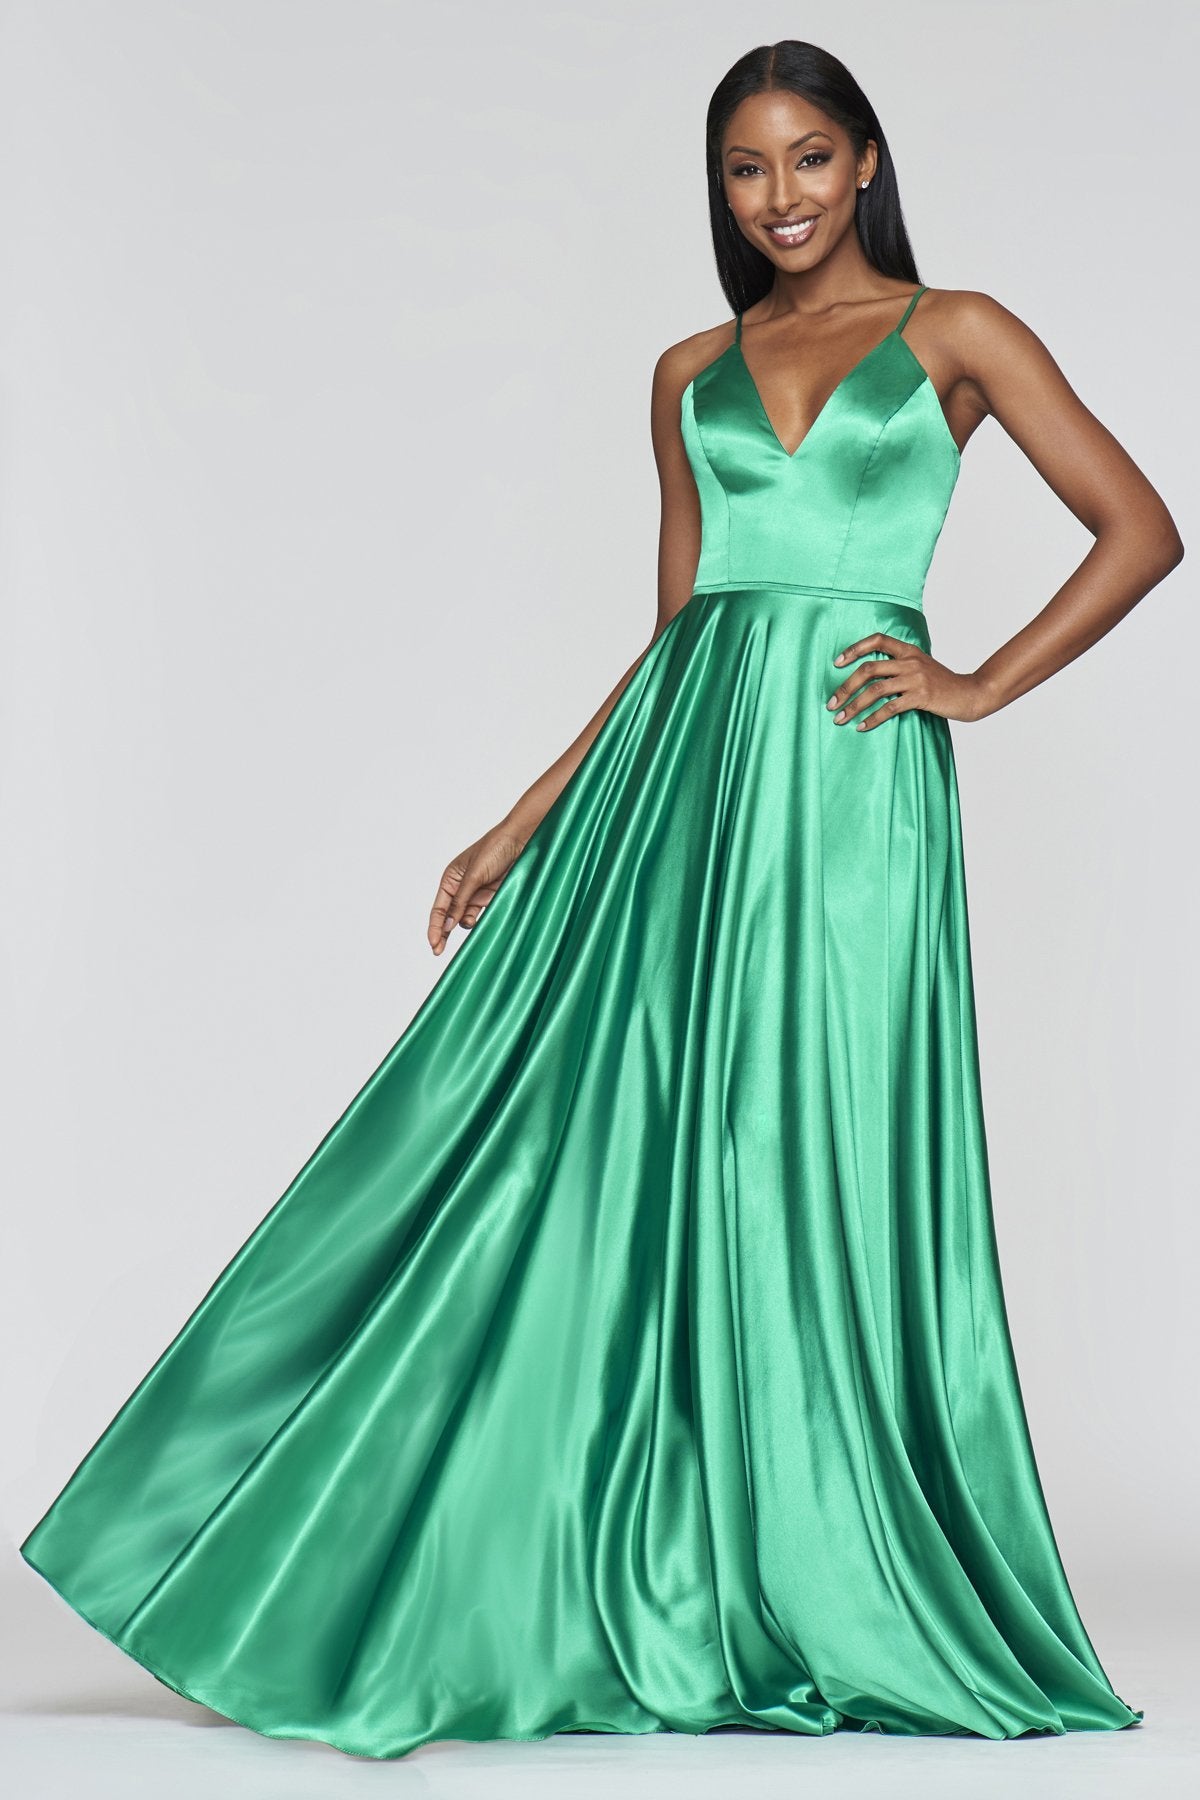 Faviana - Lace Up Back Satin High Slit Dress S10209 In Green